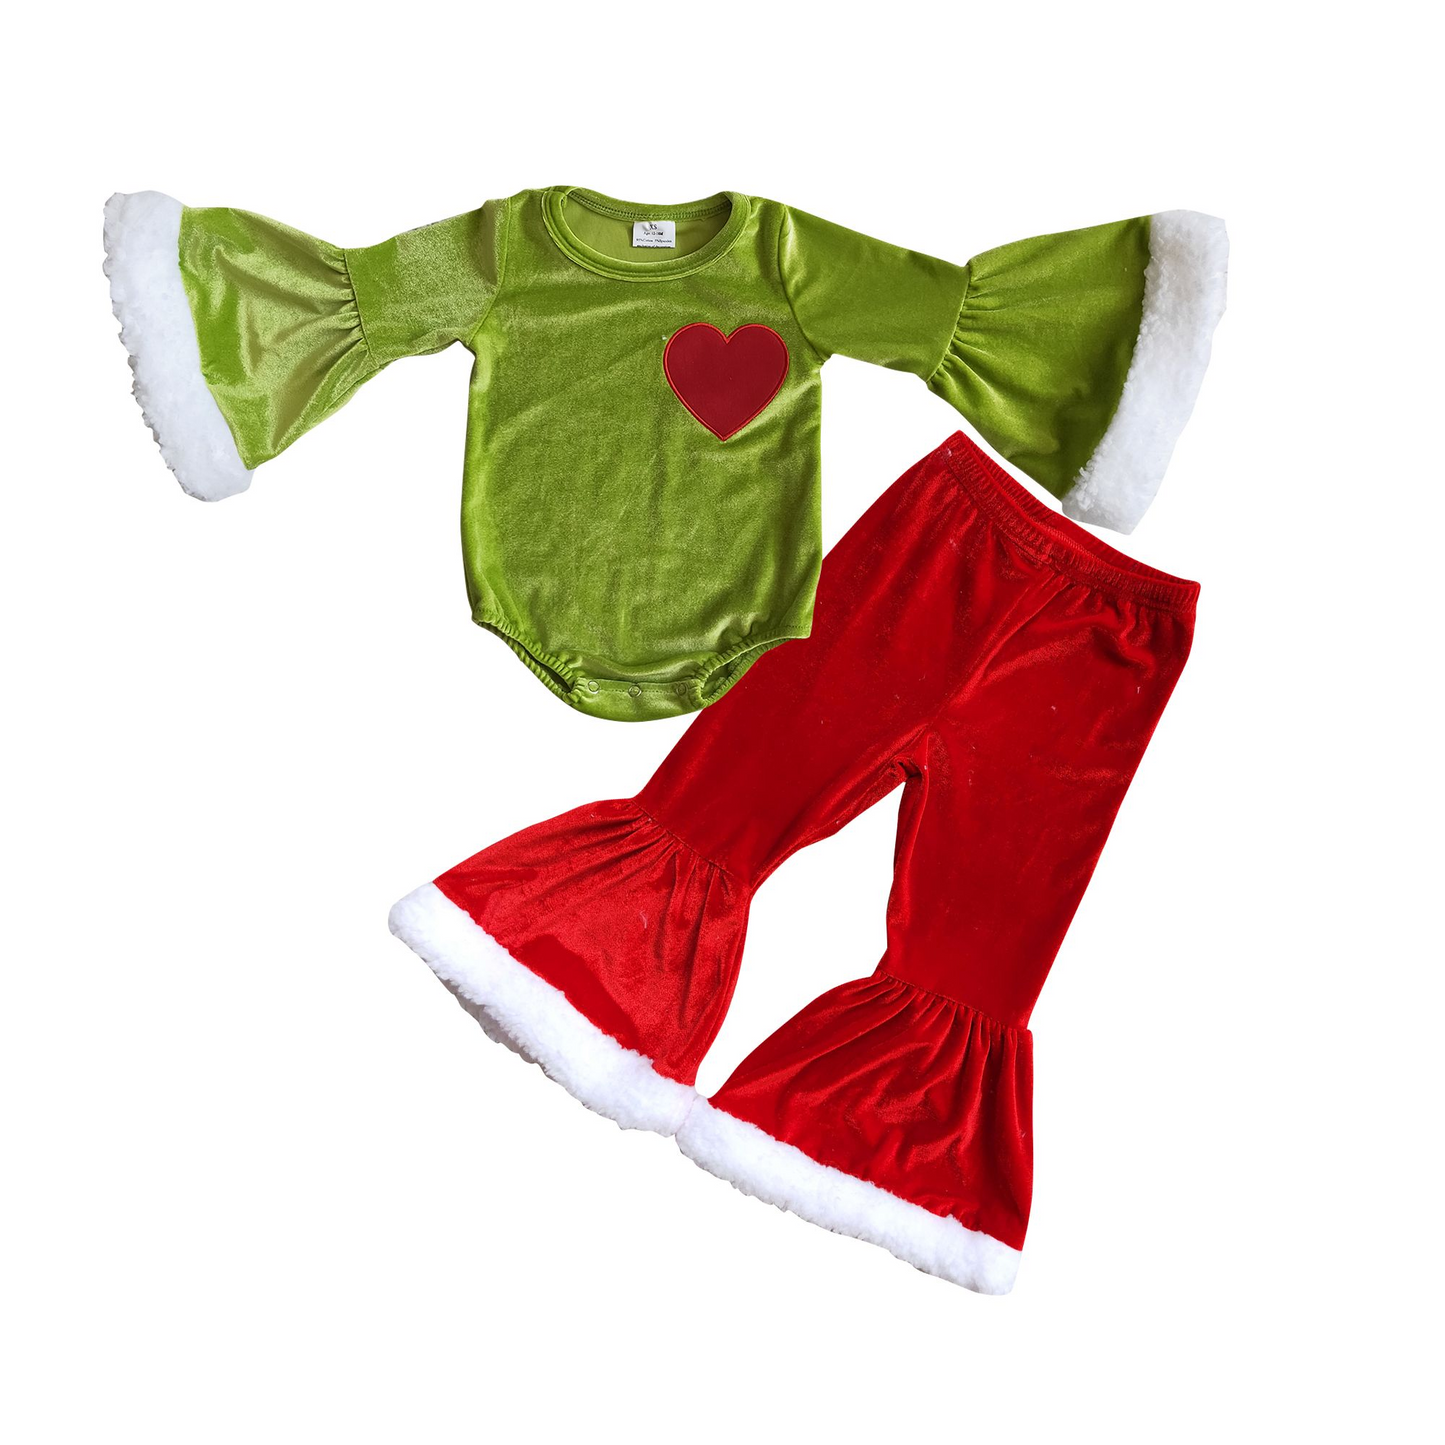 Heart green face romper 6 A4-4 red velvet pants A4-10 girls Christmas outfits